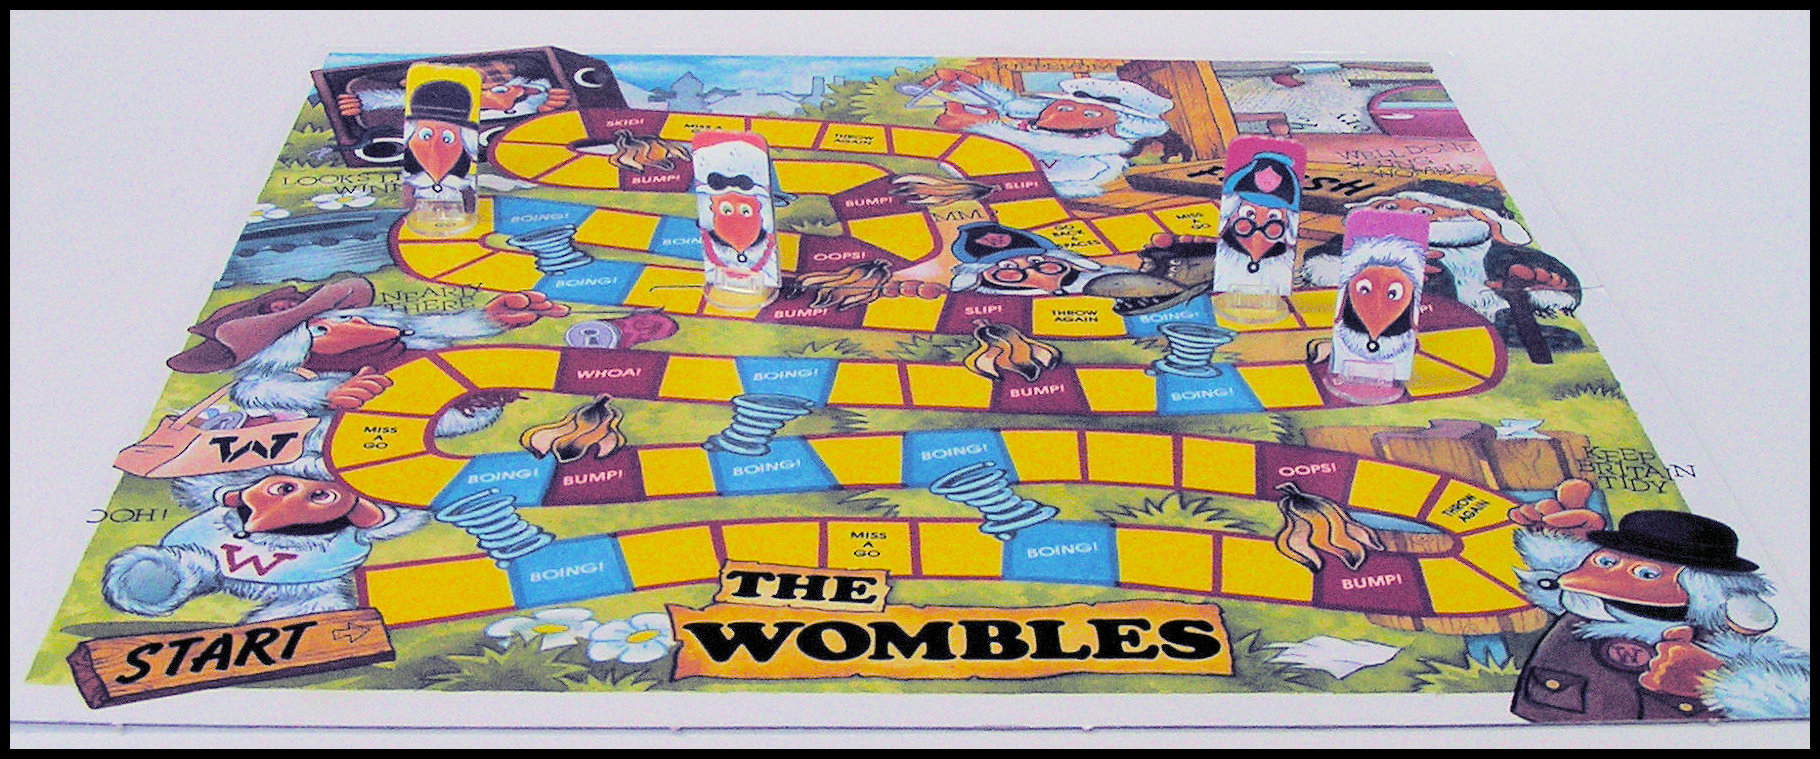 The Wombles - Game In Progress